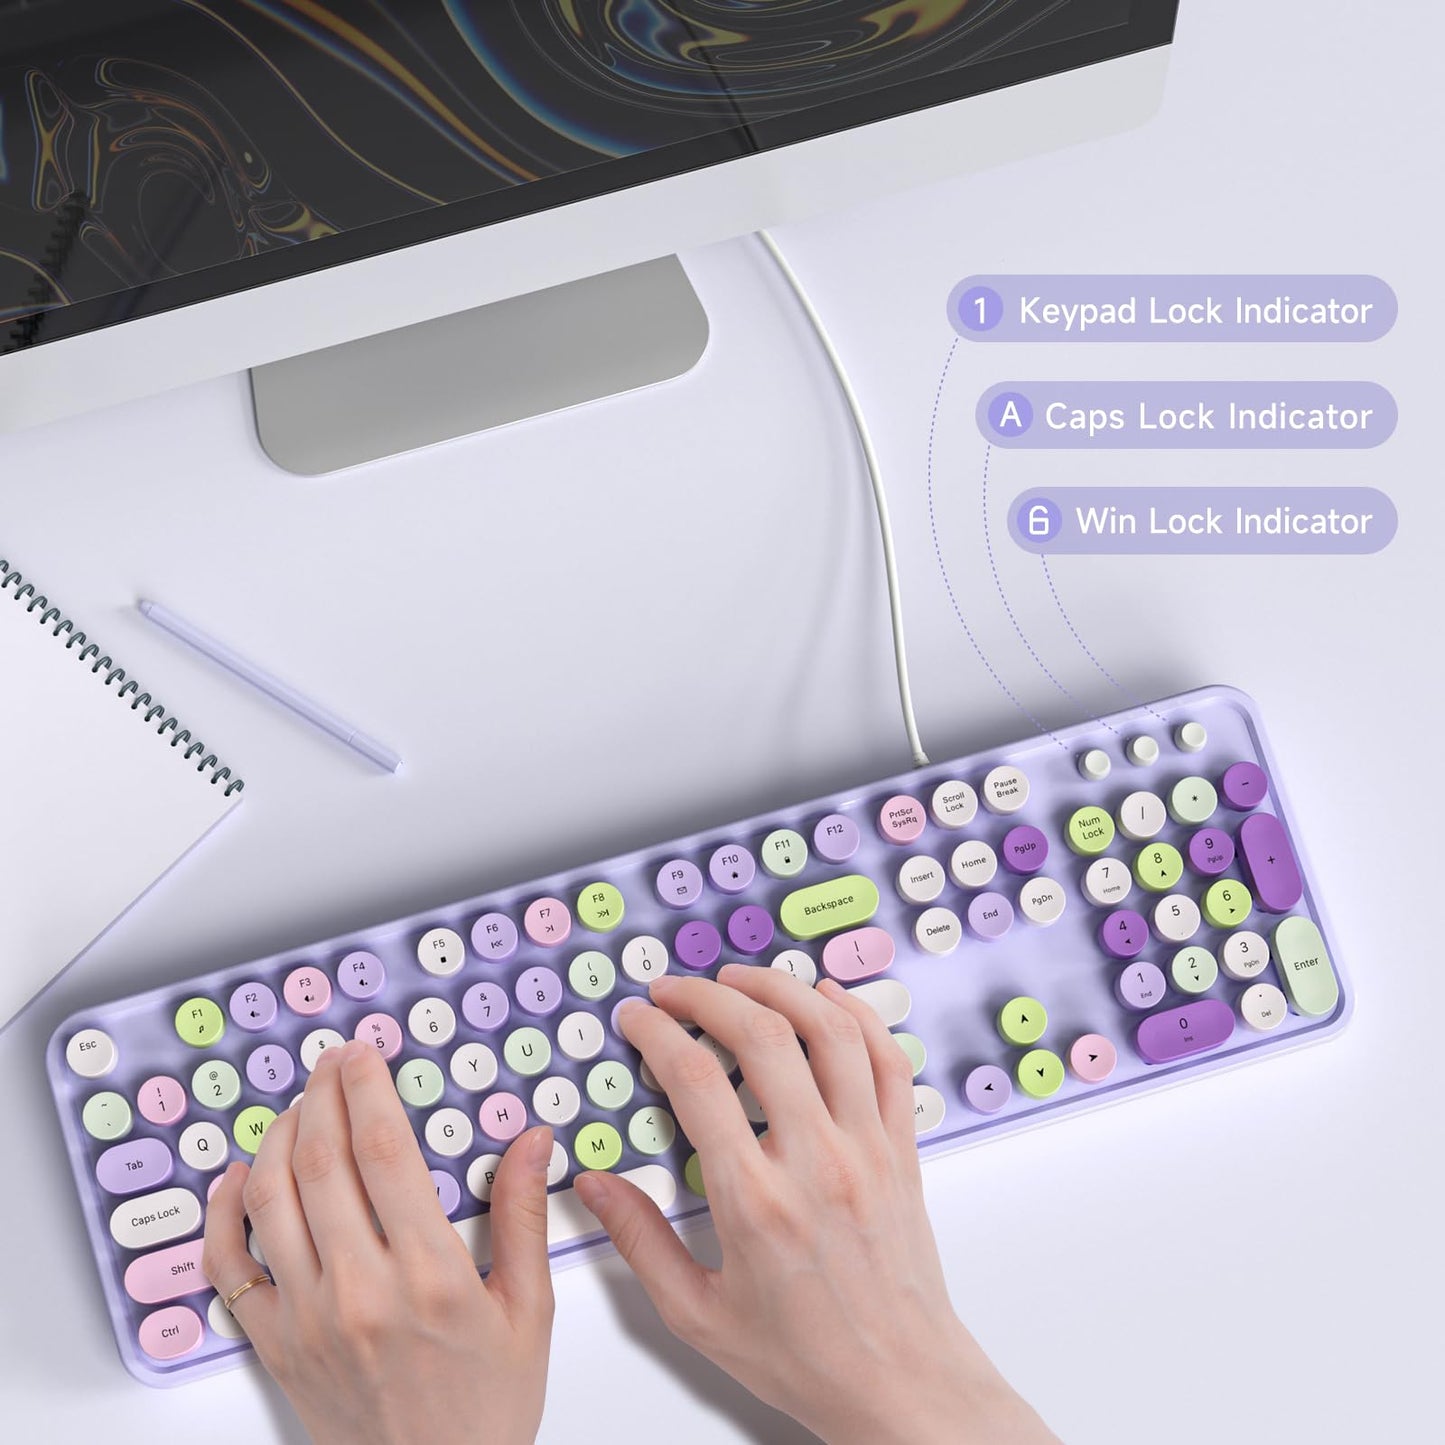 MOWUX Computer Keyboard Wired, Plug and Play USB Retro Round Typewriter Keyboard, Full Size Wired Keyboard with Foldable Stands for Laptop and Office PC- Purple Colorful